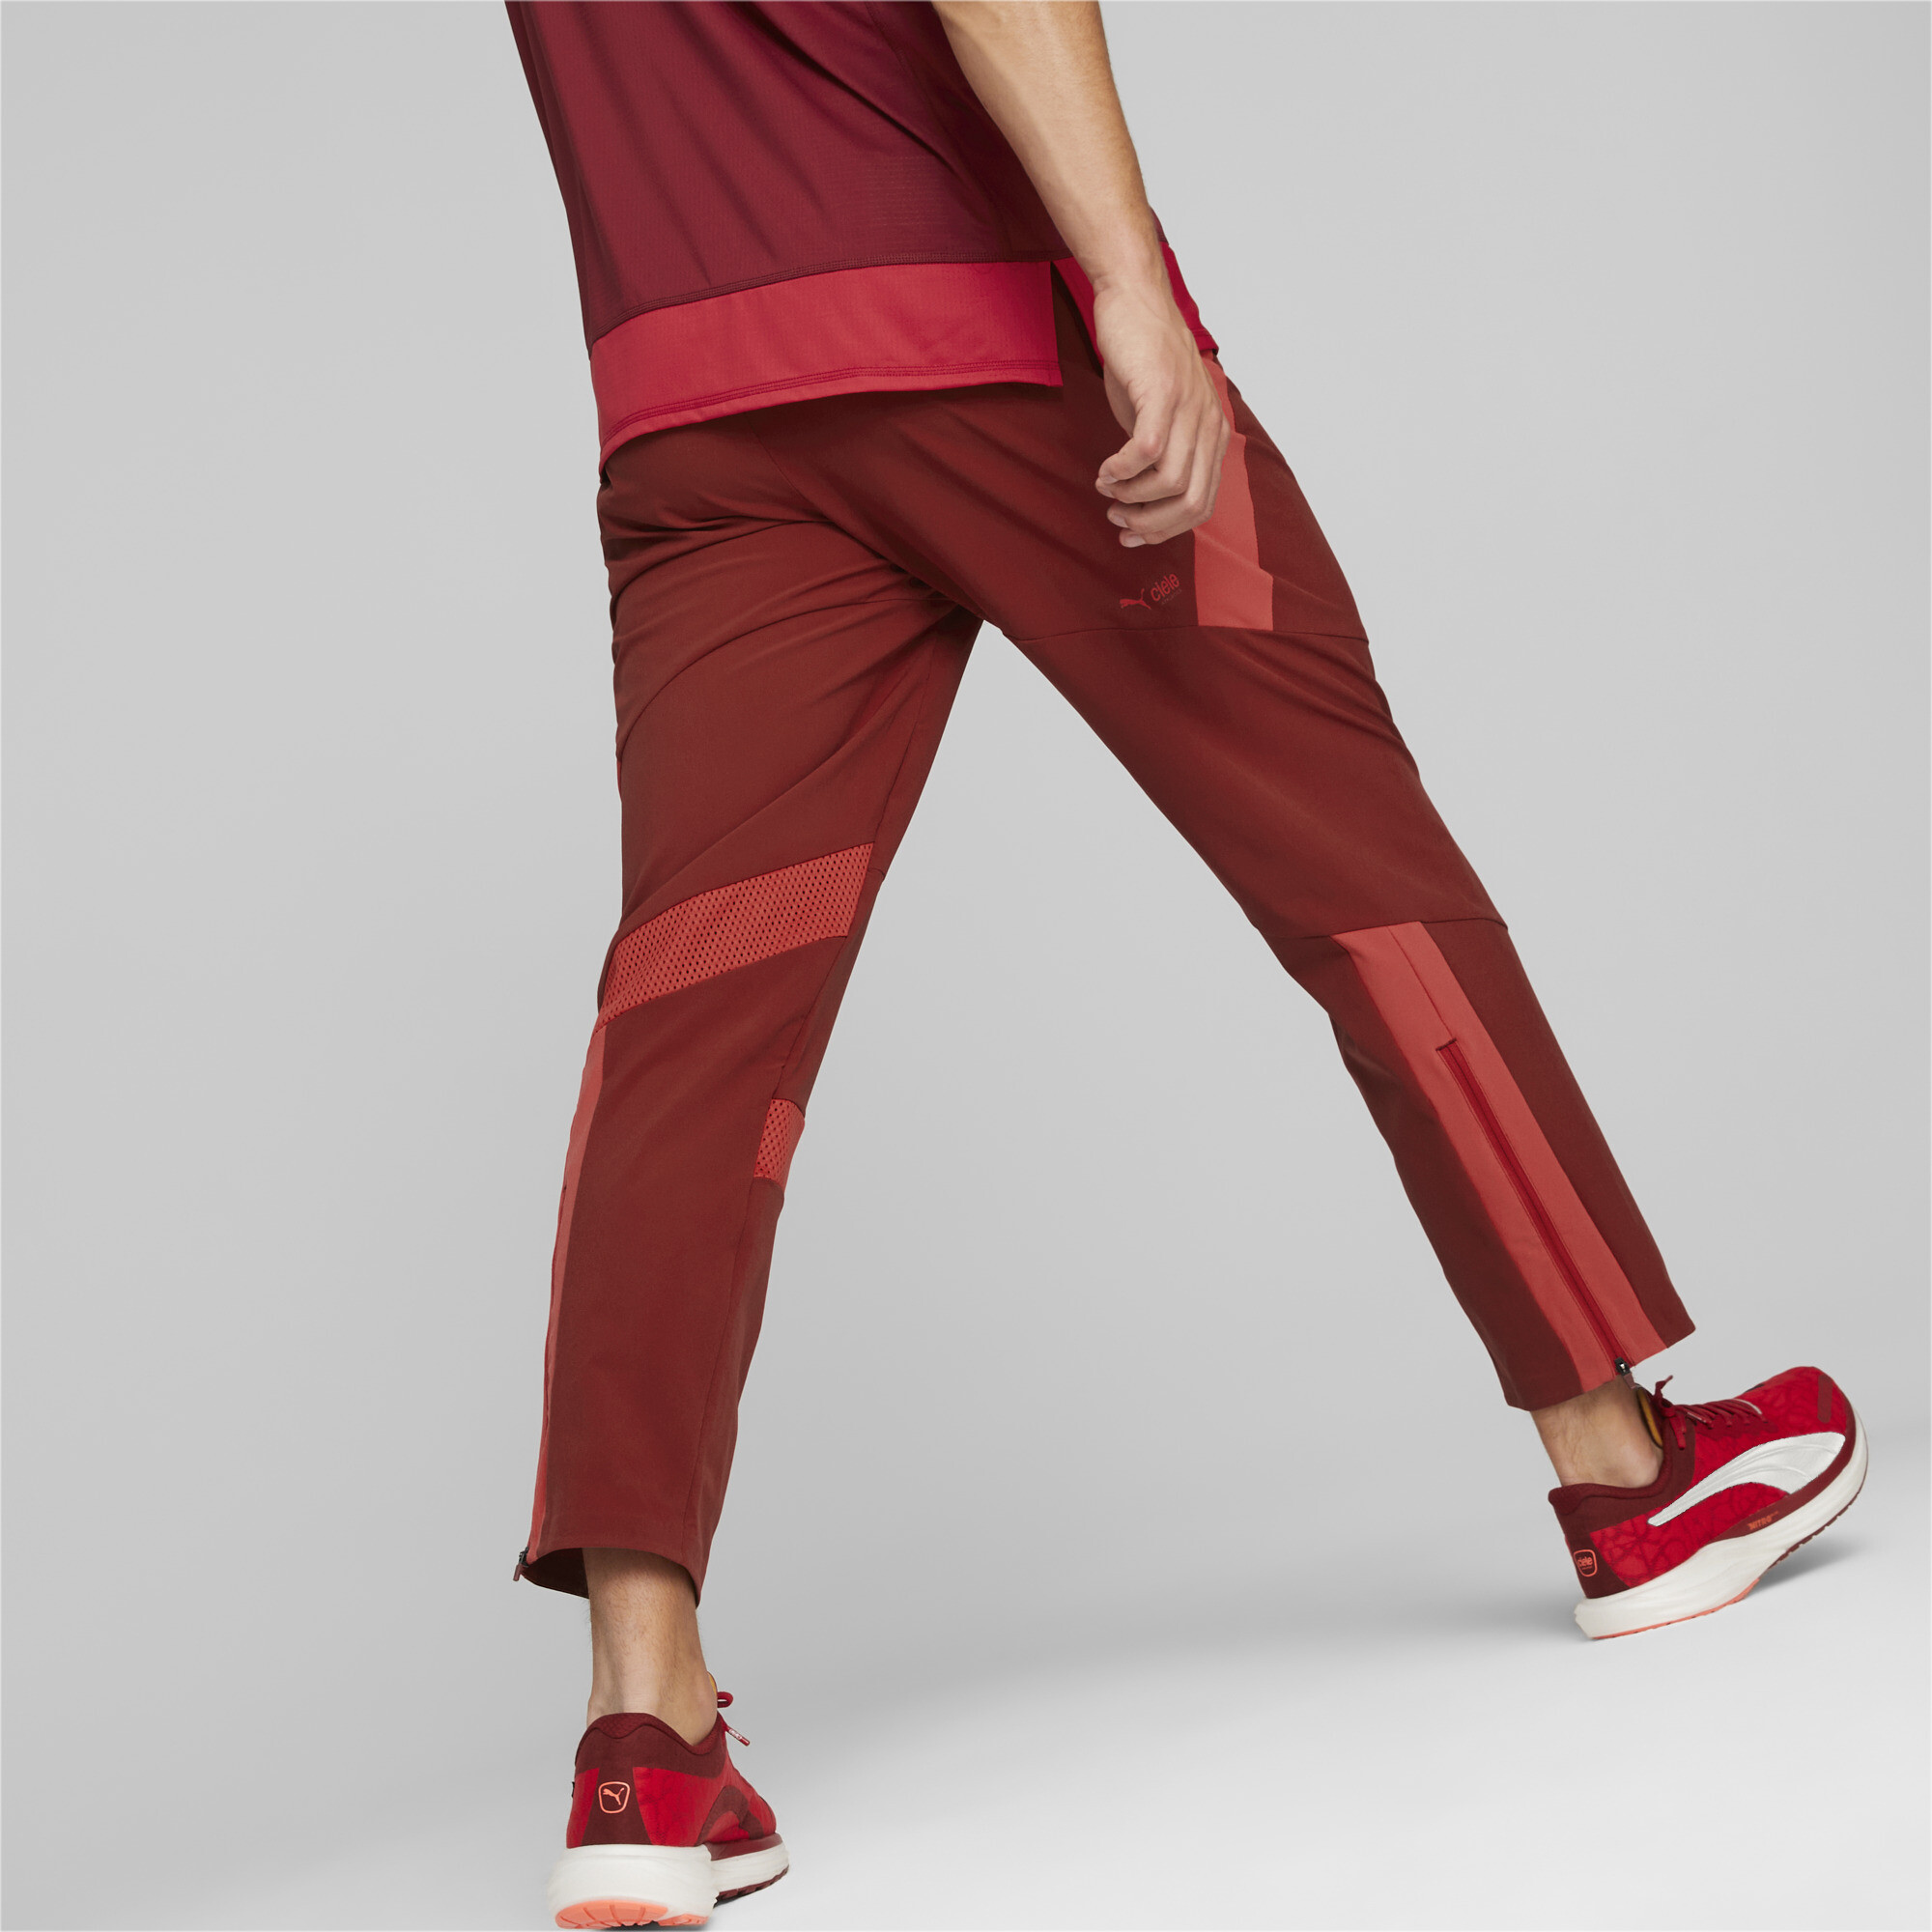 Men's PUMA X CIELE Running Tracksuit Pants In Red, Size Small